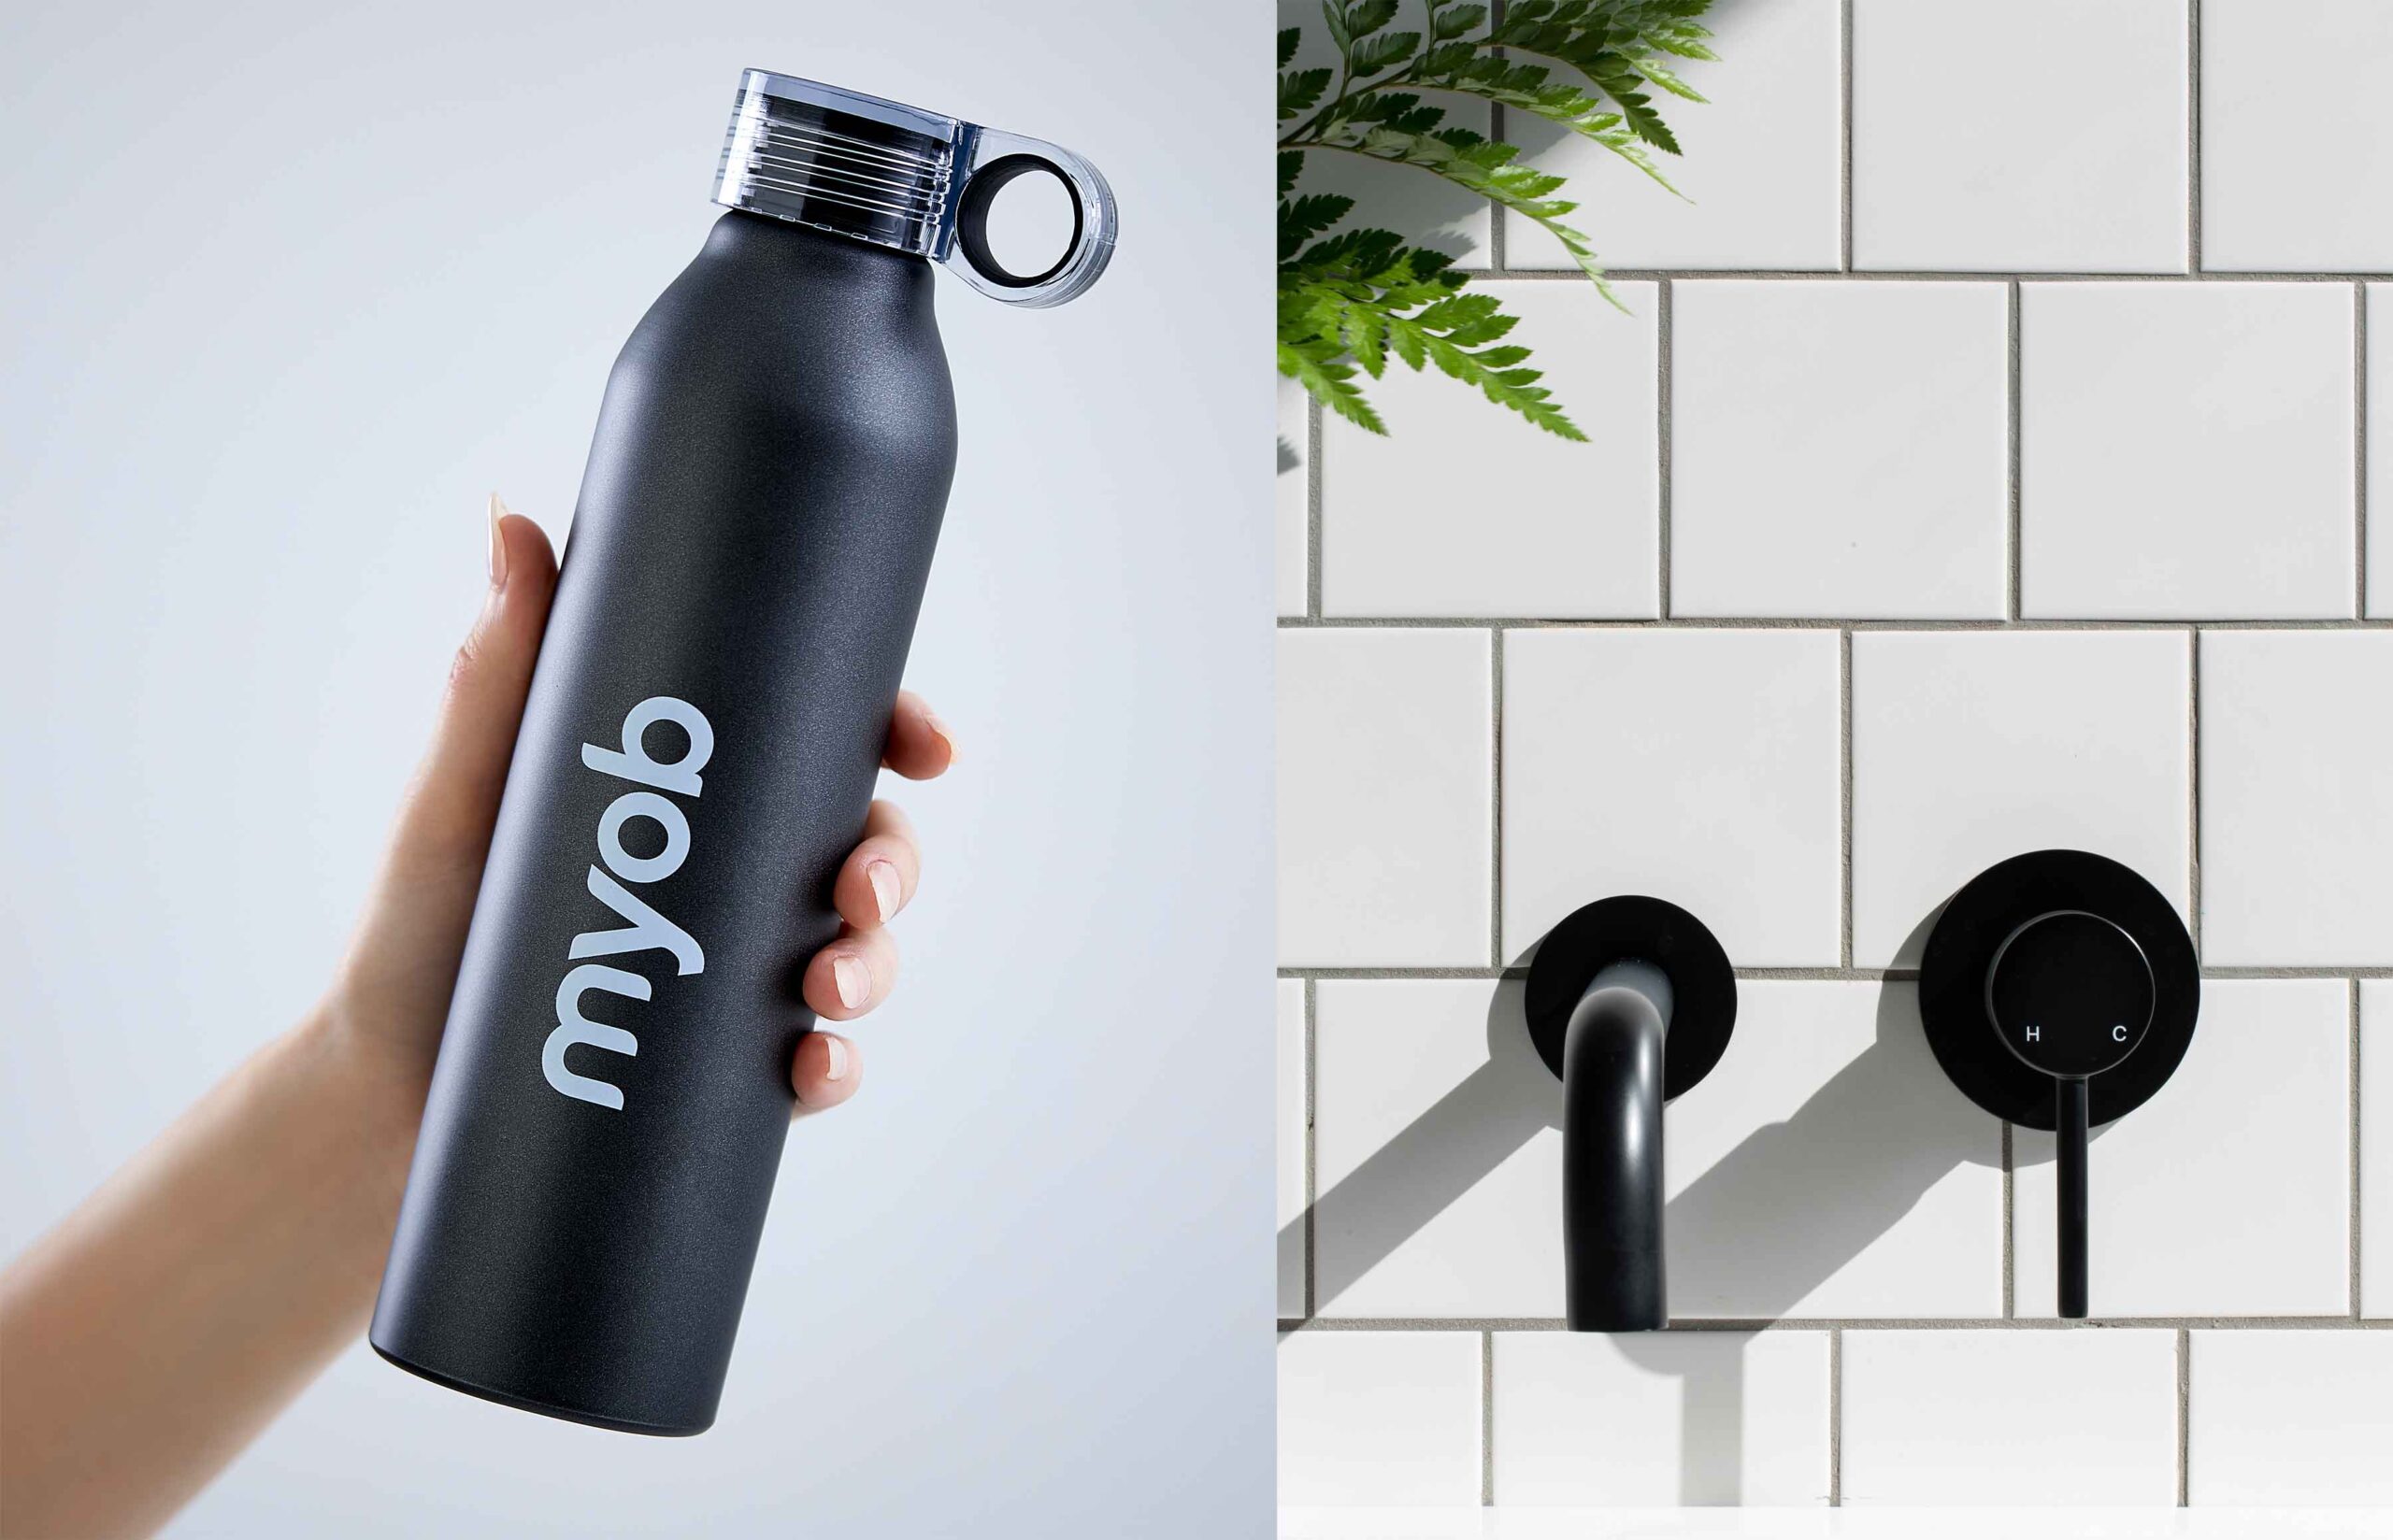 2 product images, one for MYOB of a bottle and 1 for tabs for Meir Black